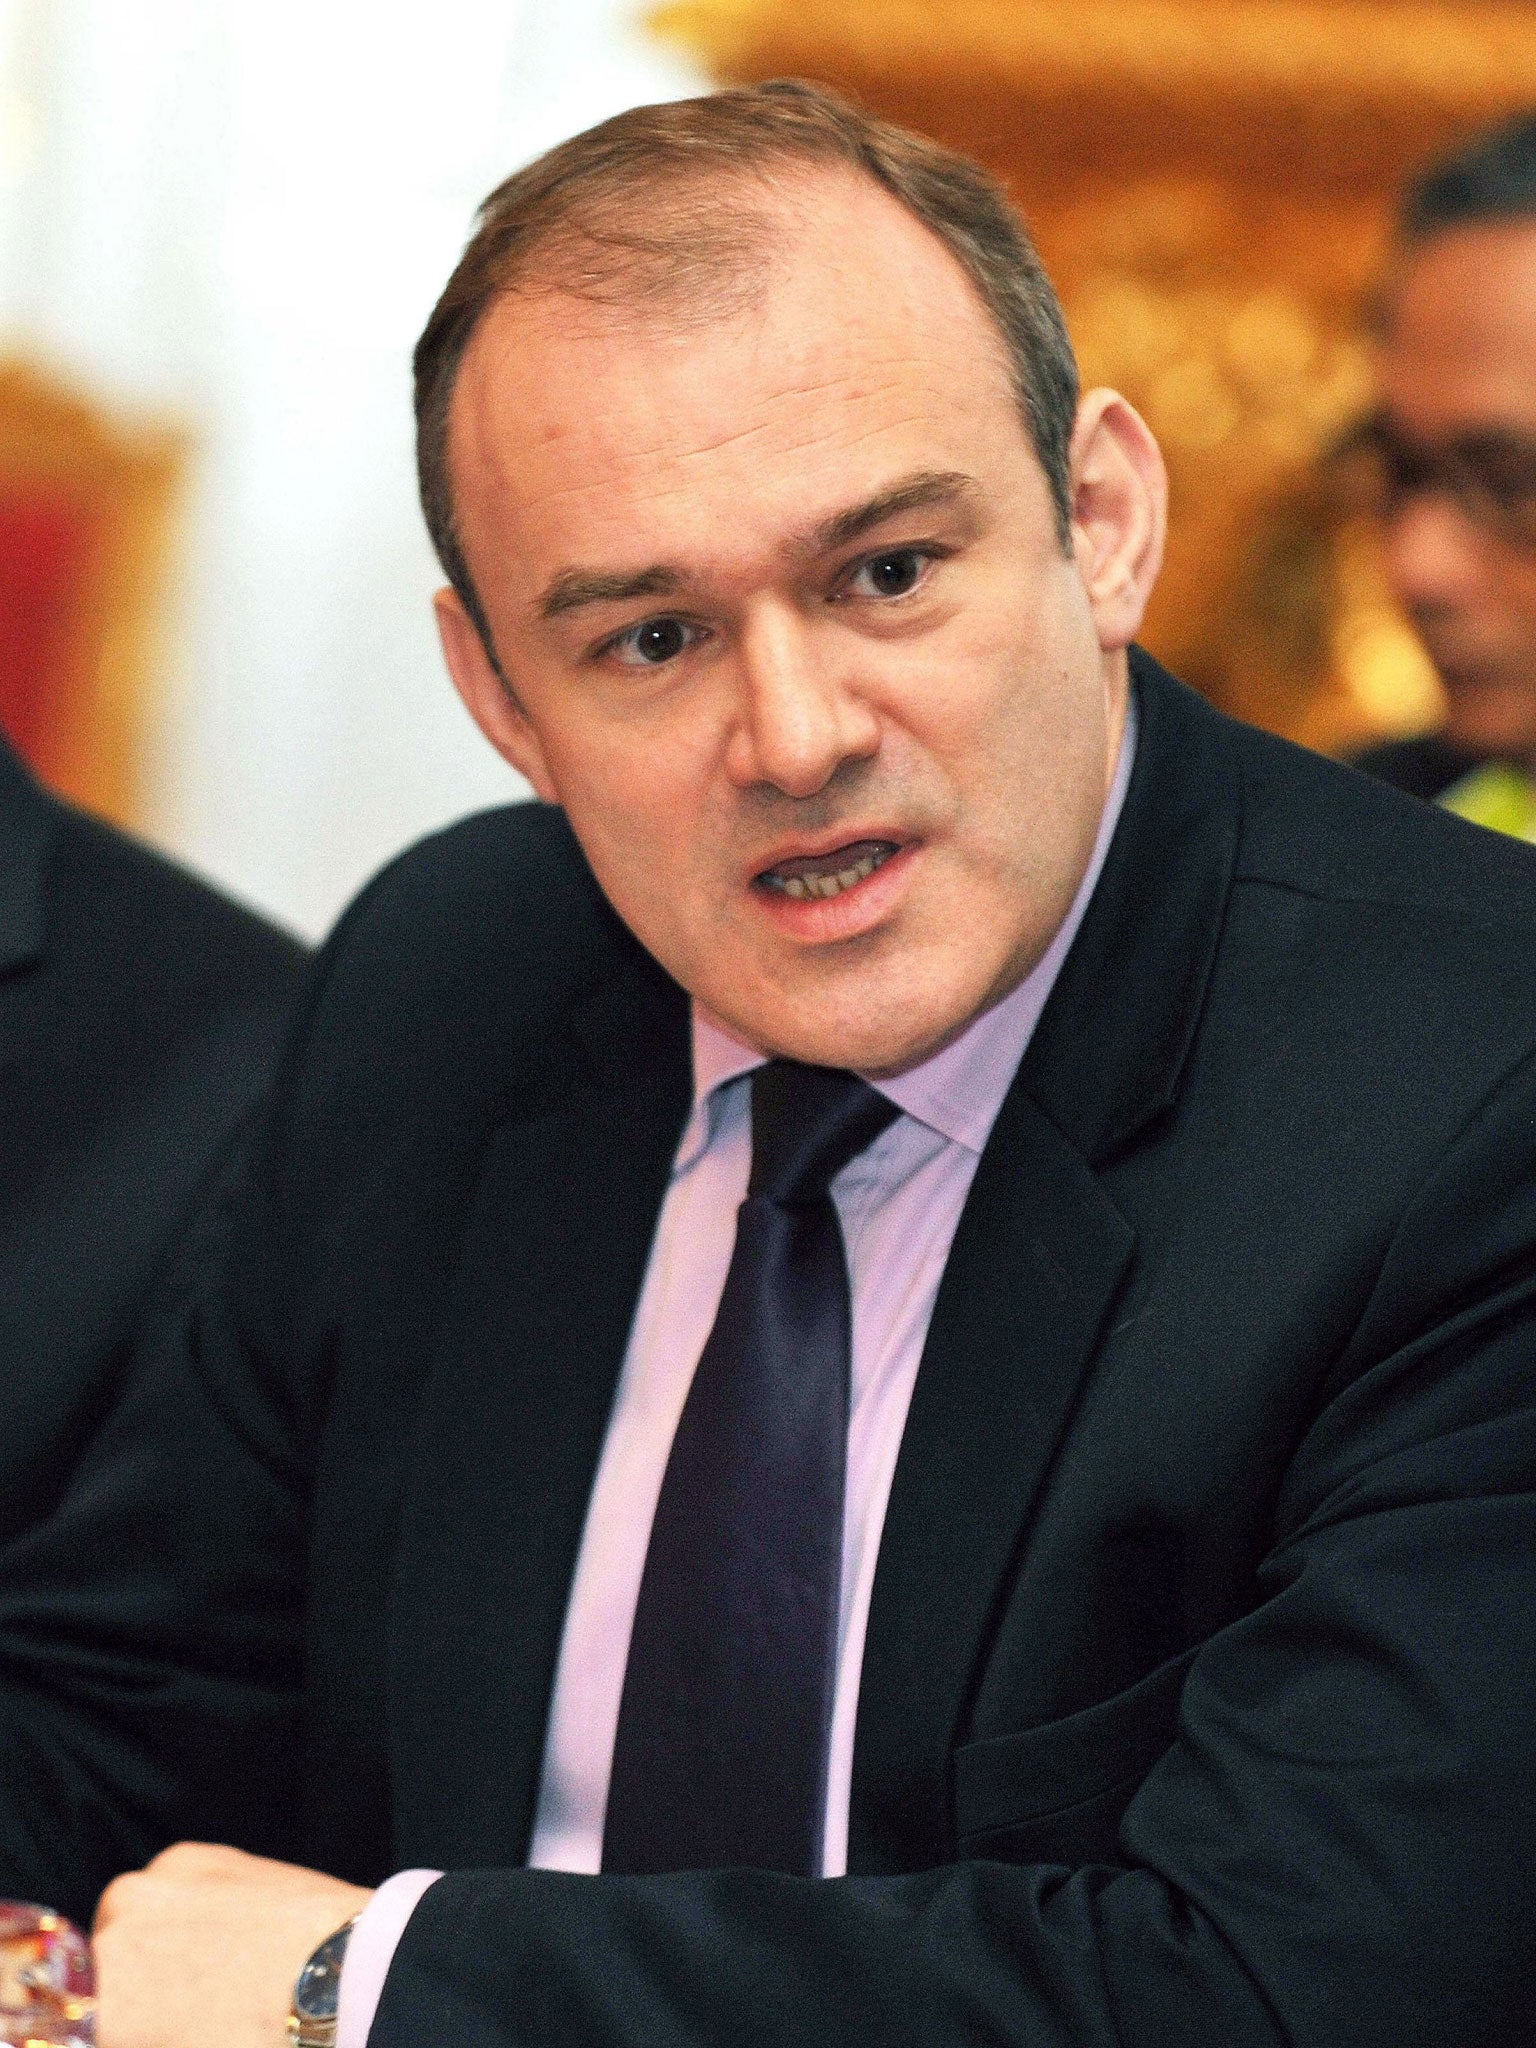 Ed Davey: The Energy Secretary has been accused of being more concerned with 'ideology' than scientific evidence